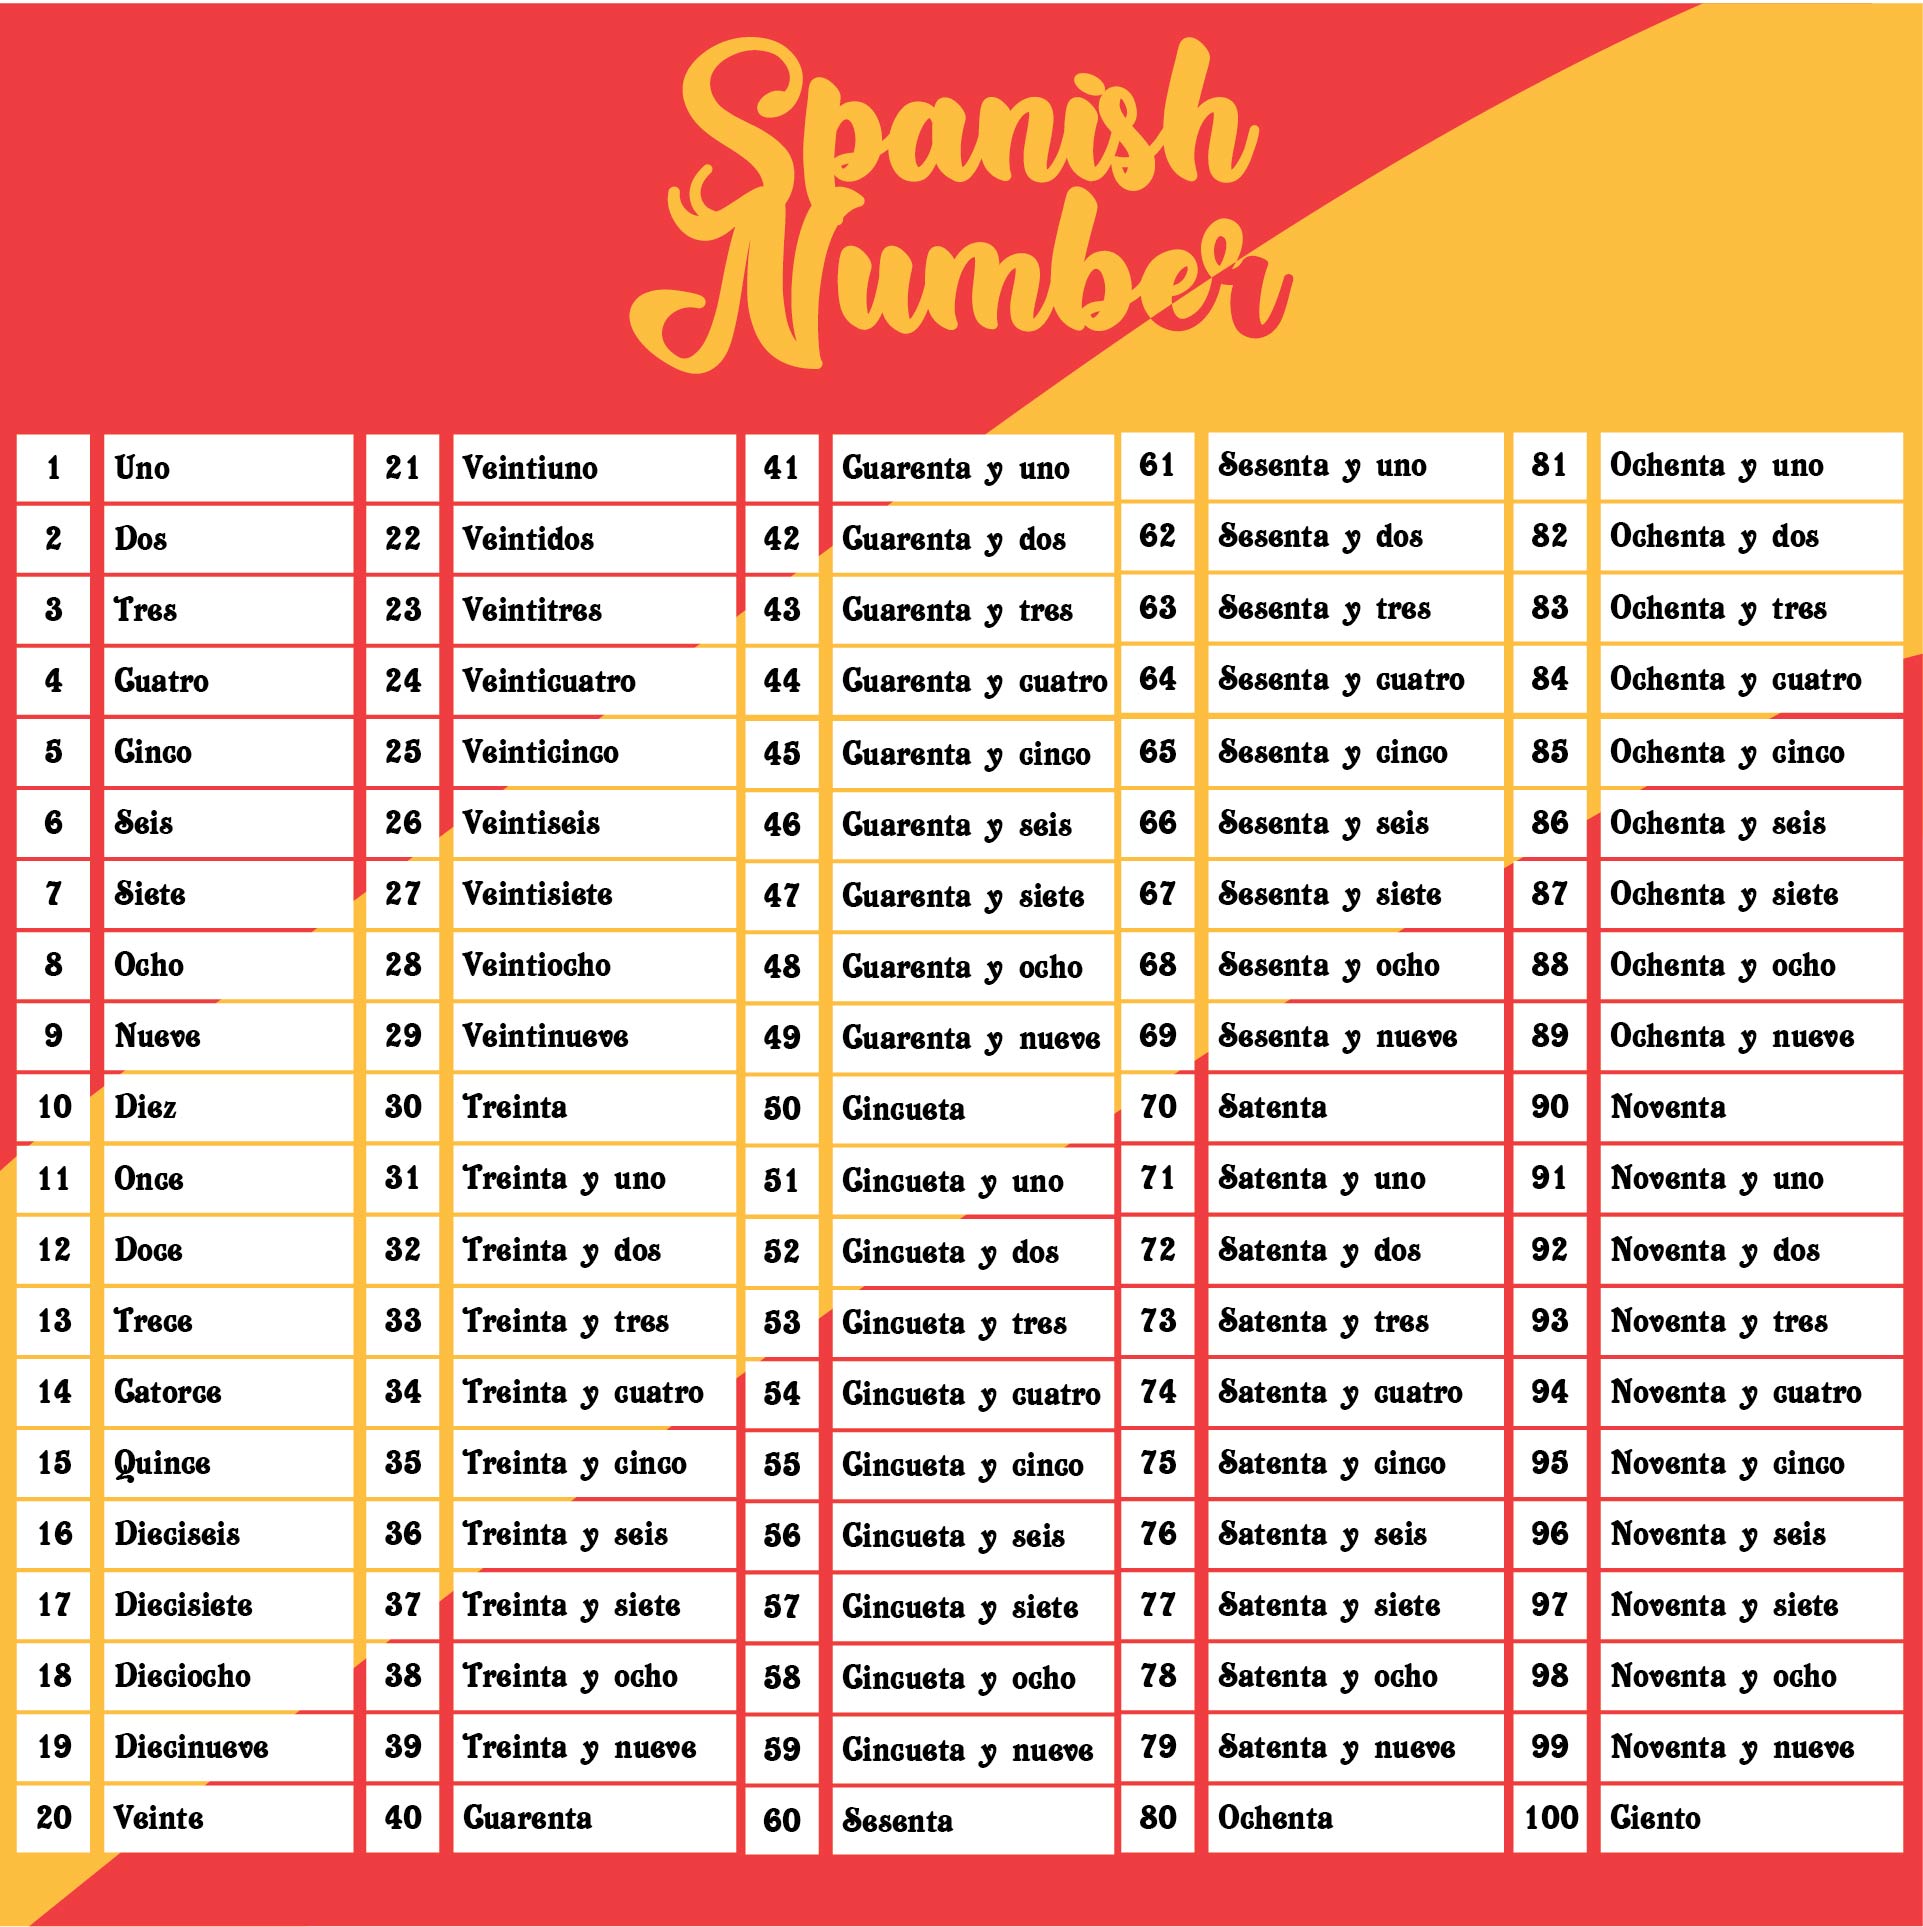 5-best-images-of-spanish-numbers-1-50-printable-spanish-numbers-1-50-spanish-numbers-1-100